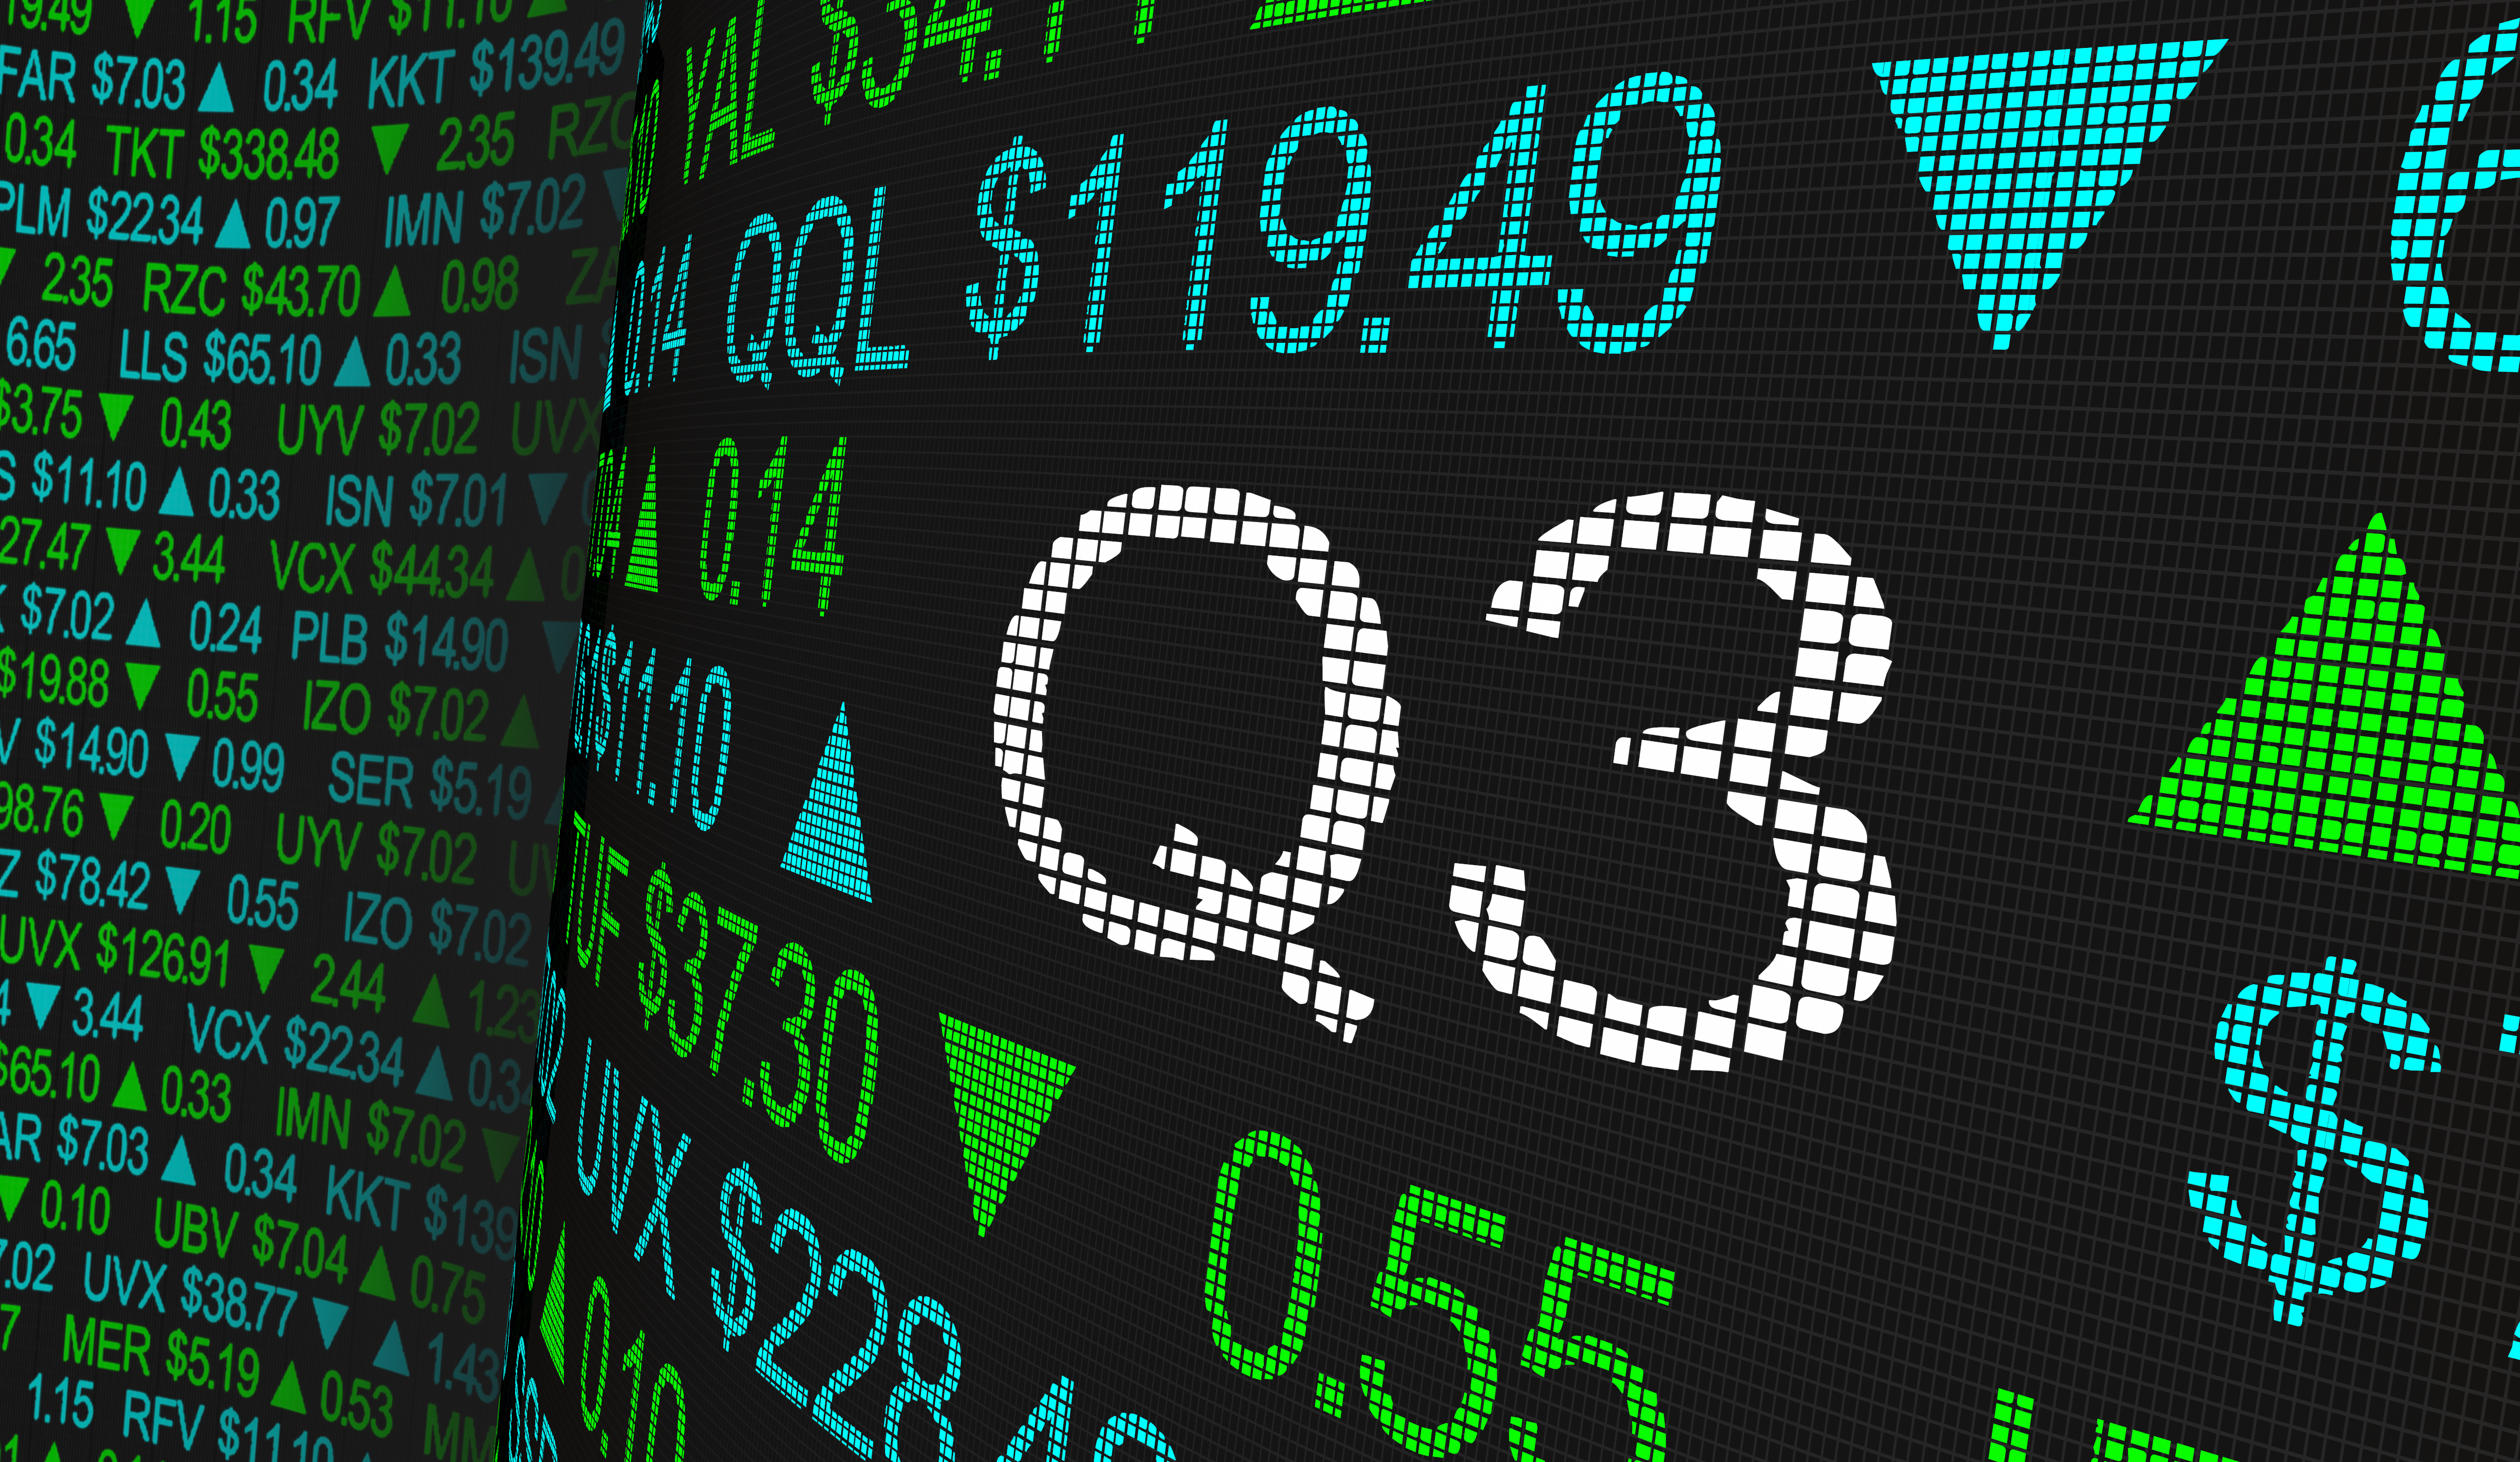 A stock ticker showing Q3 results